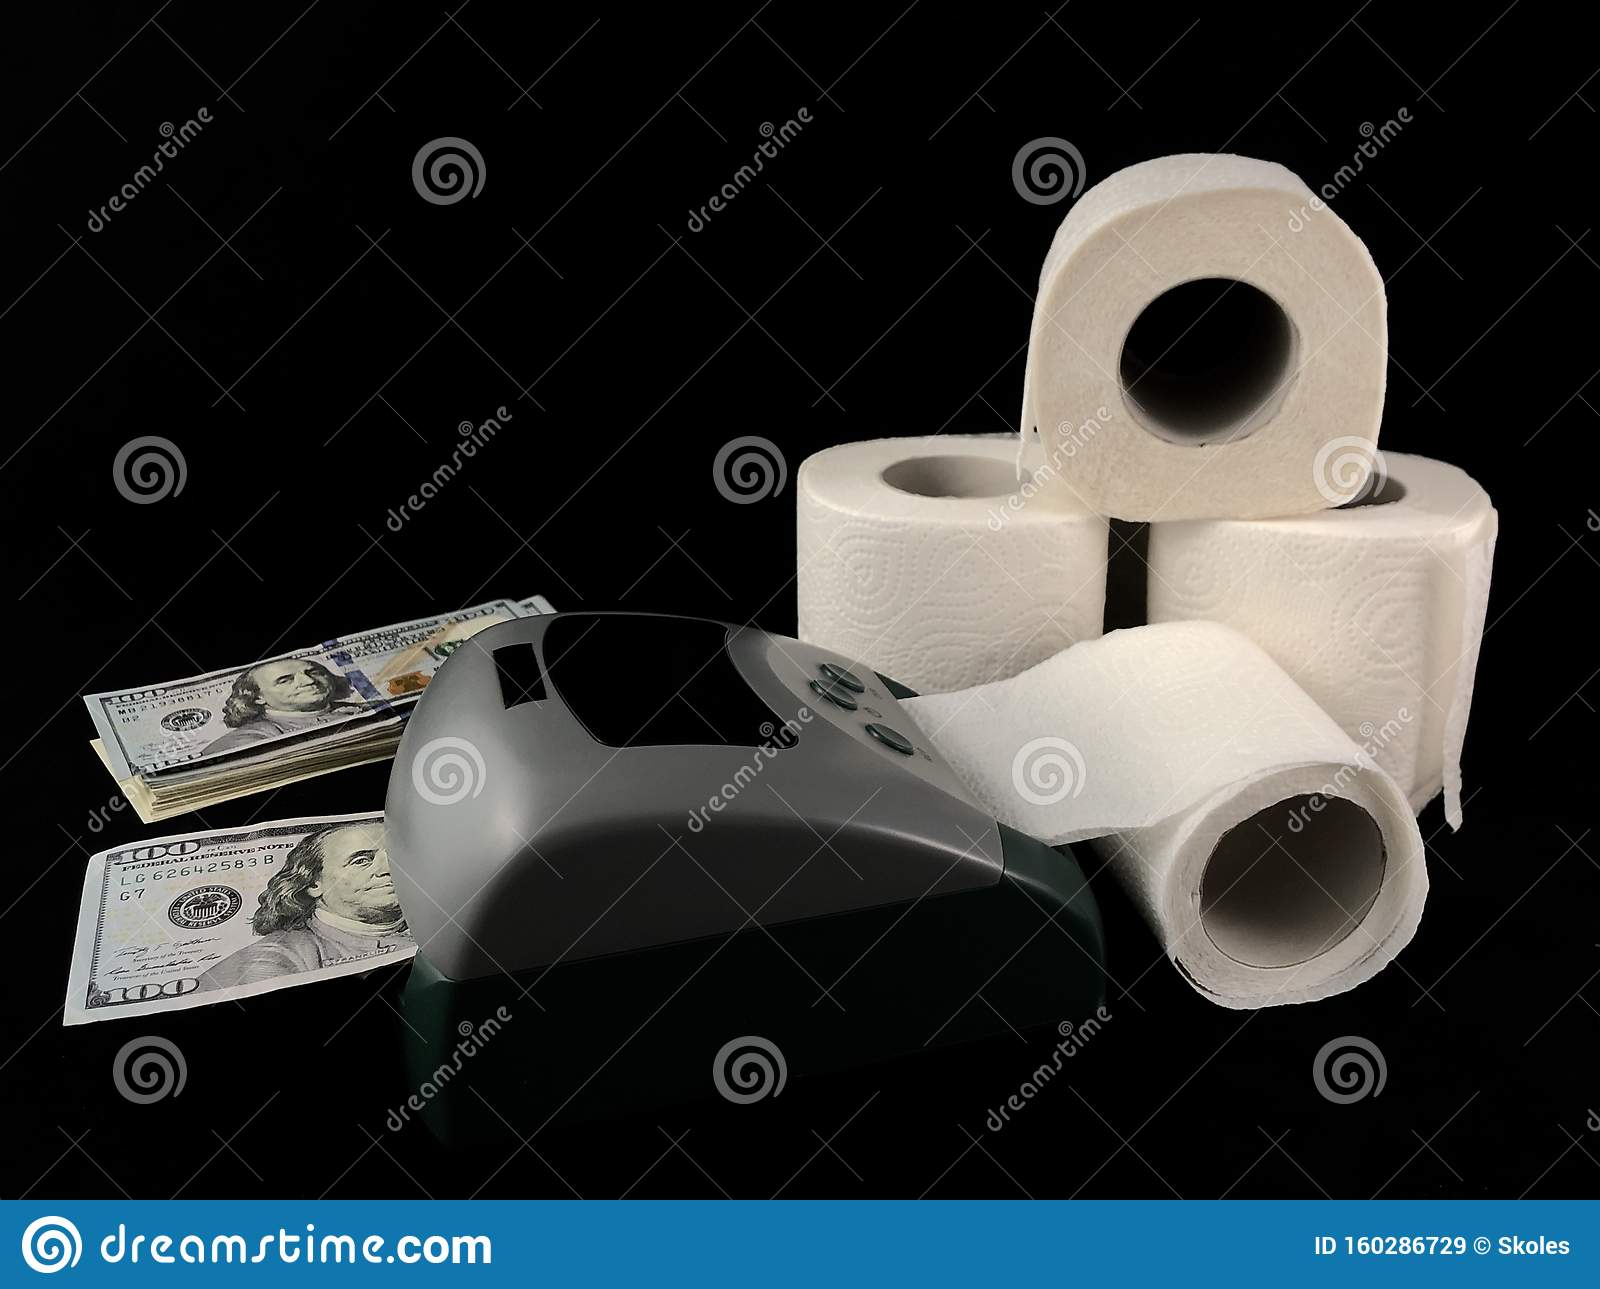 machine-production-dollars-making-toilet-paper-fake-american-money-concept-trash-detector-checking-counting-160286729.jpg